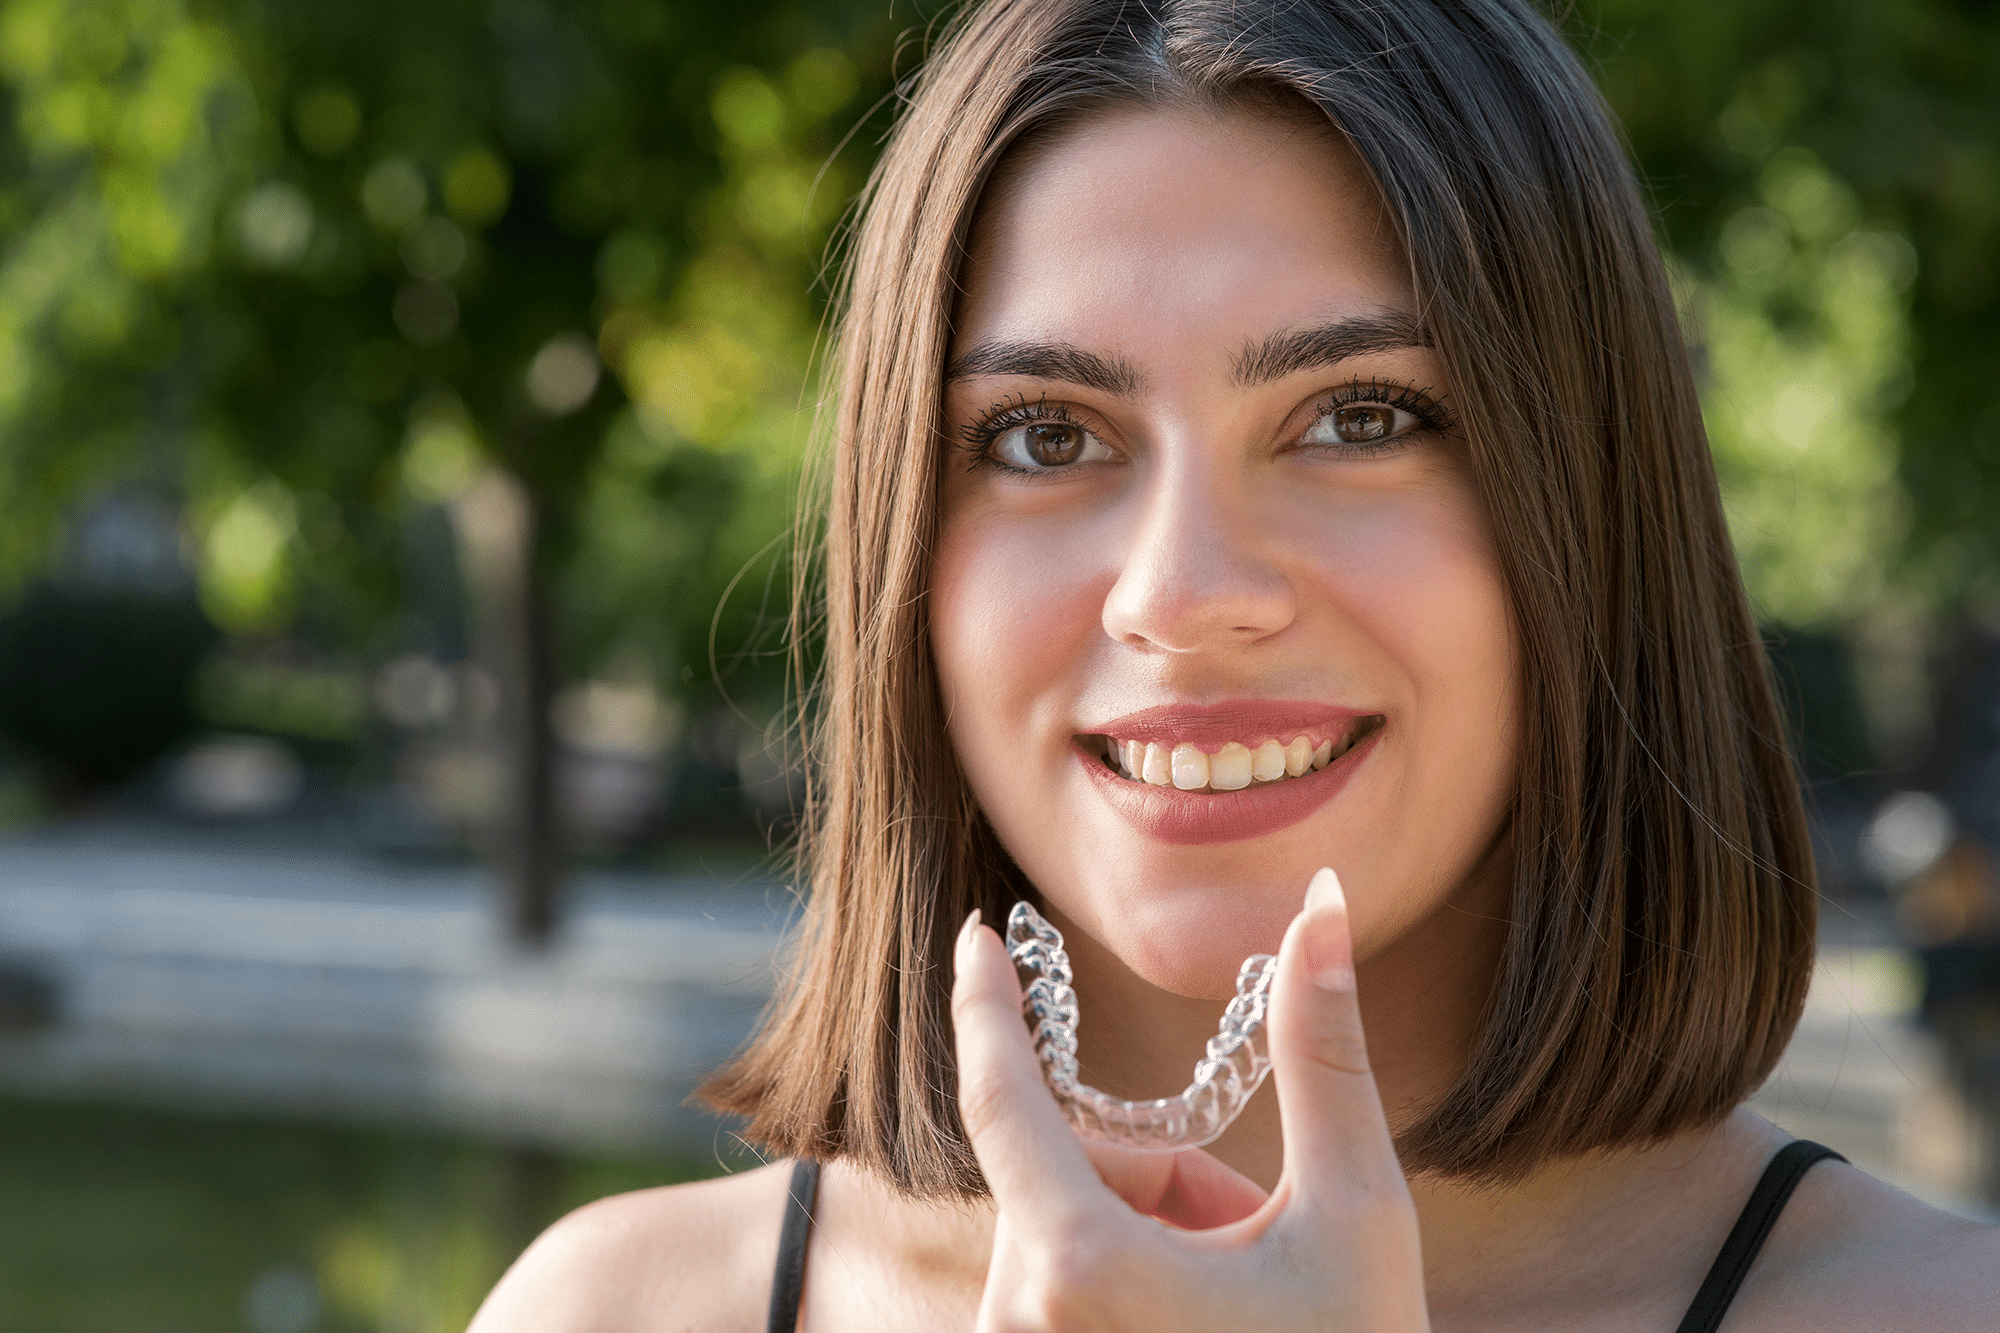 Clear aligners marlton Clear Aligners for a Better Smile Marlton Root Canal Therapy What is Root Canal Therapy? Can Anyone Get Dental Implants? Dental Implants Marlton. Acorn Dental. Emergency, Sleep Apnea, Invisalign, Implants, Cosmetic Dentist.